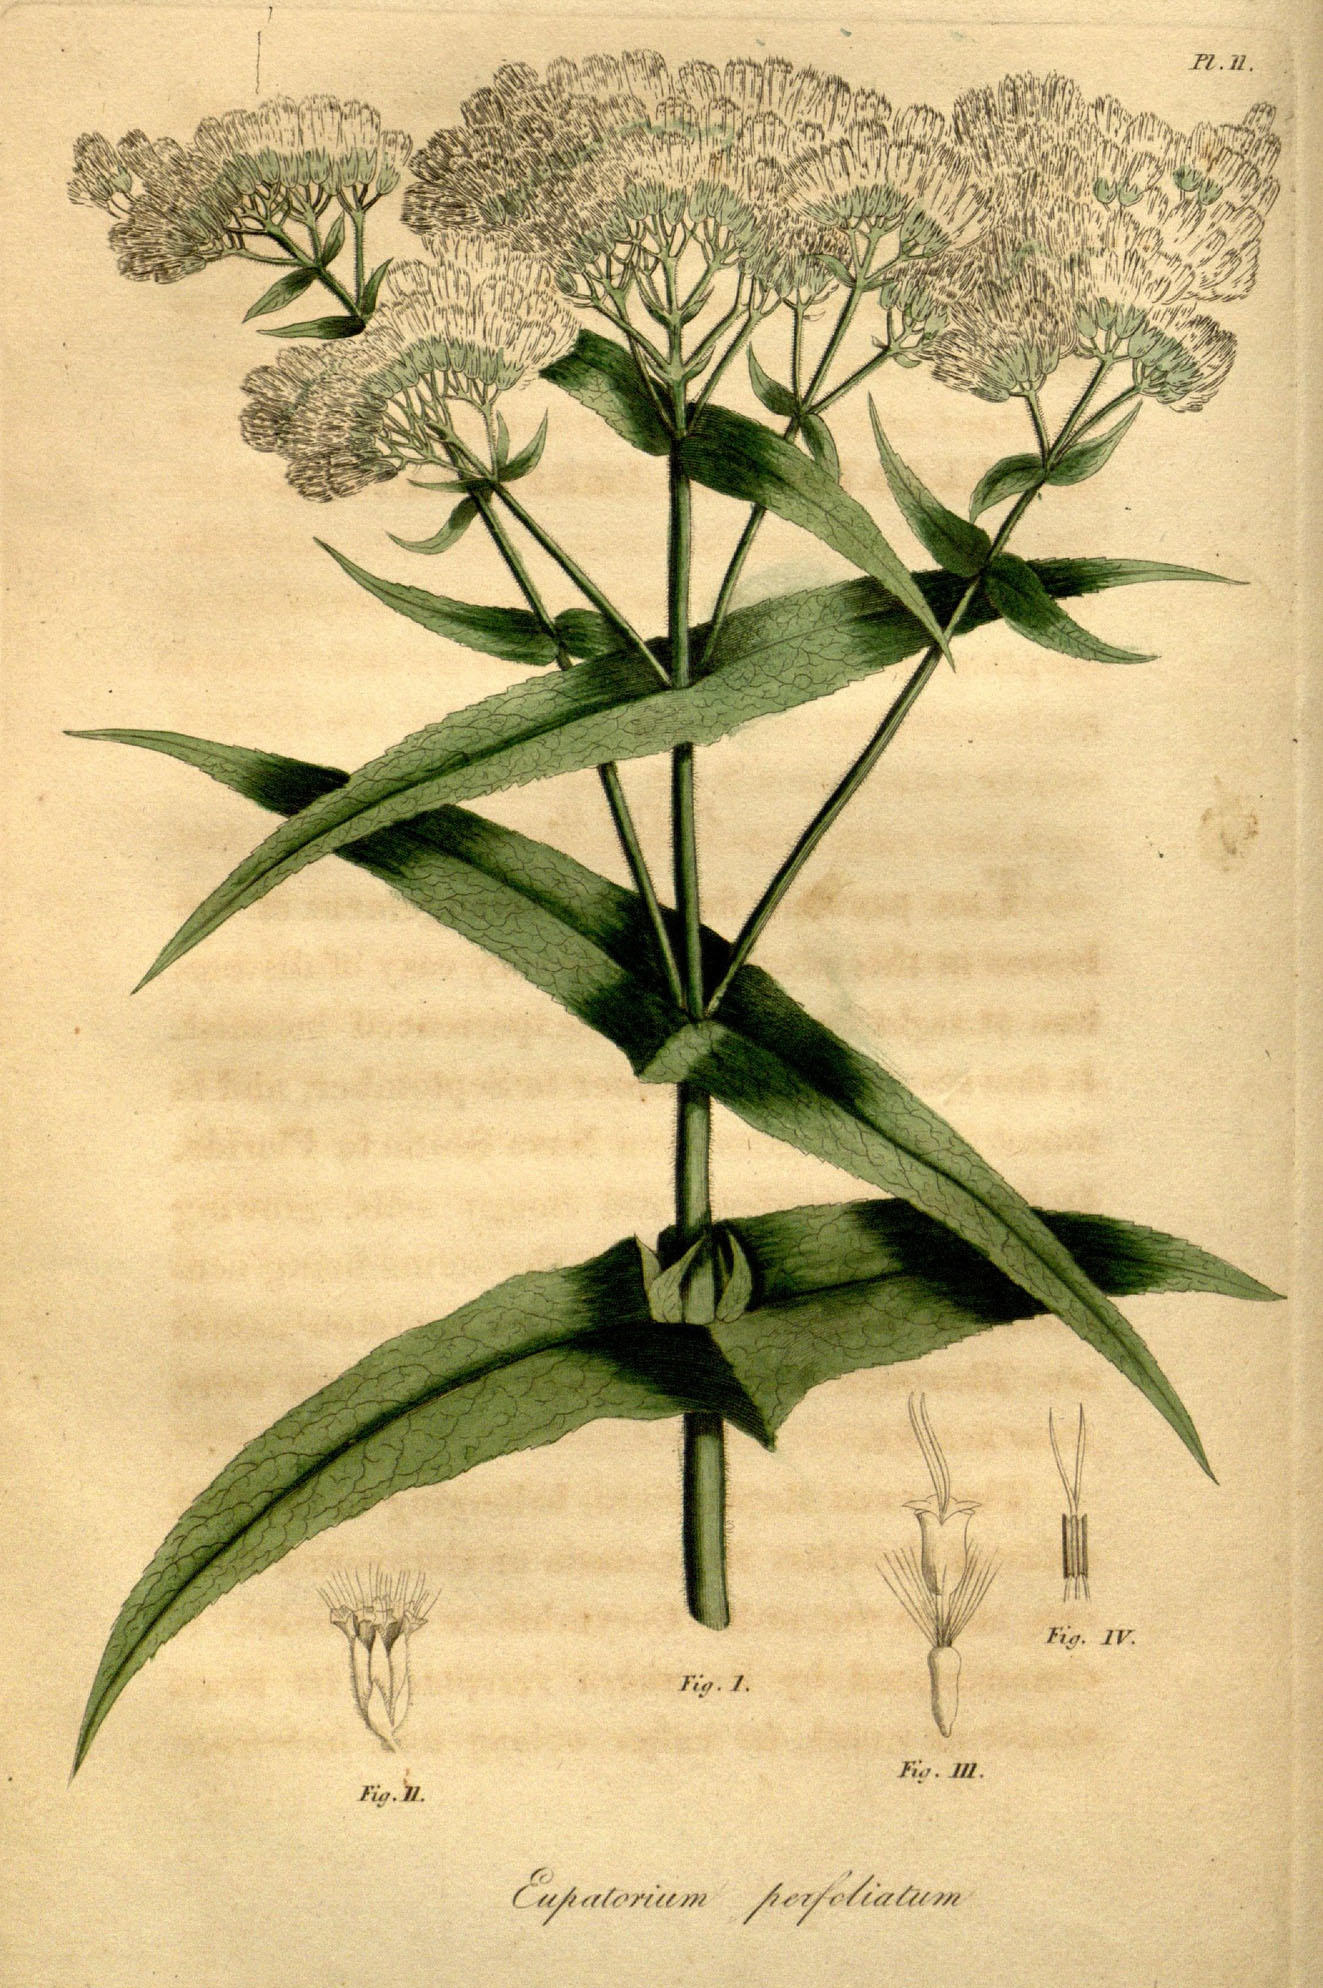 Illustration of a plant in the genus Eupatorium, with small white flowers.